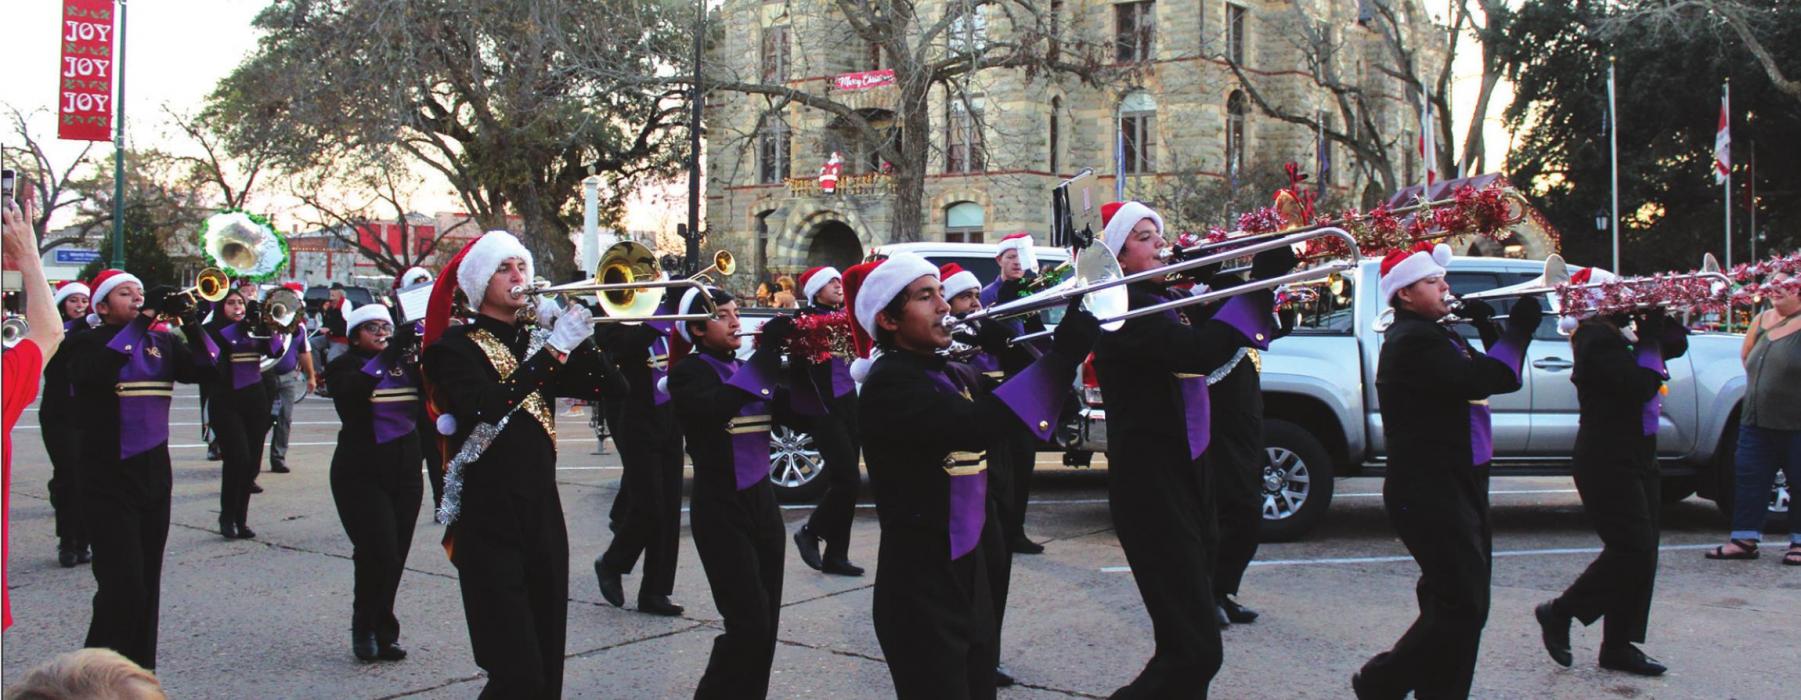 The members of the La Grange High School Band march during the Schmeckenfest parade Thursday. Photo by Jeff Wick